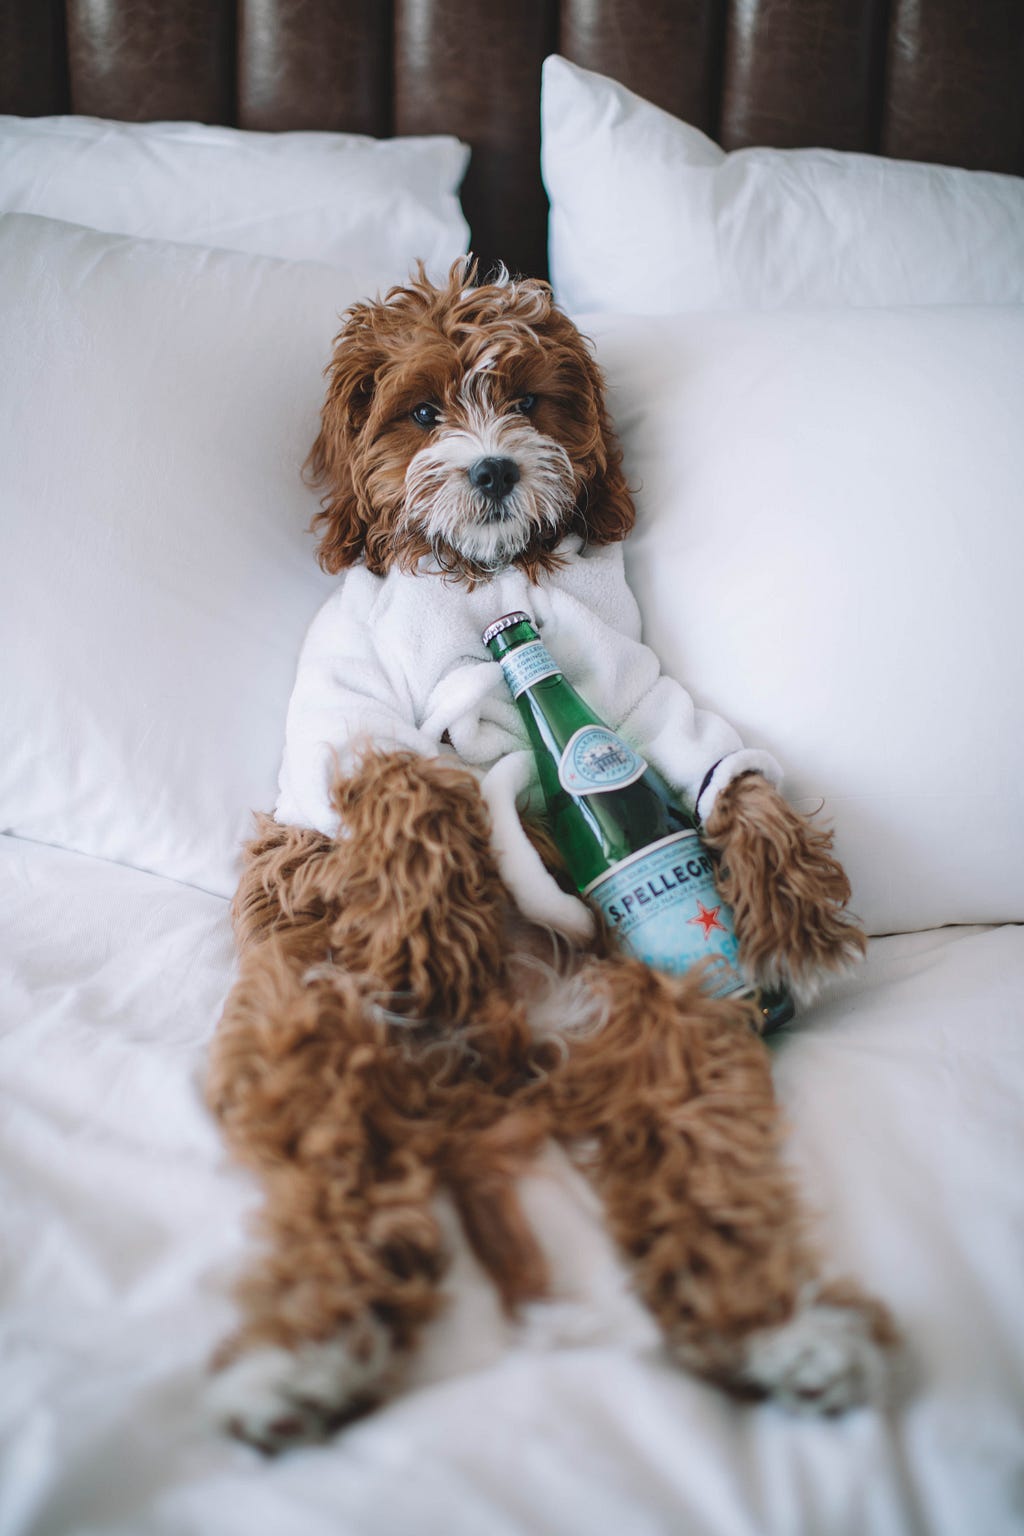 A photo of a shaggy dog lying on it’s back on a white bed. The dog is wearing a dressing gown, and holding a green bottle of Pellegrino water. Looking chill.